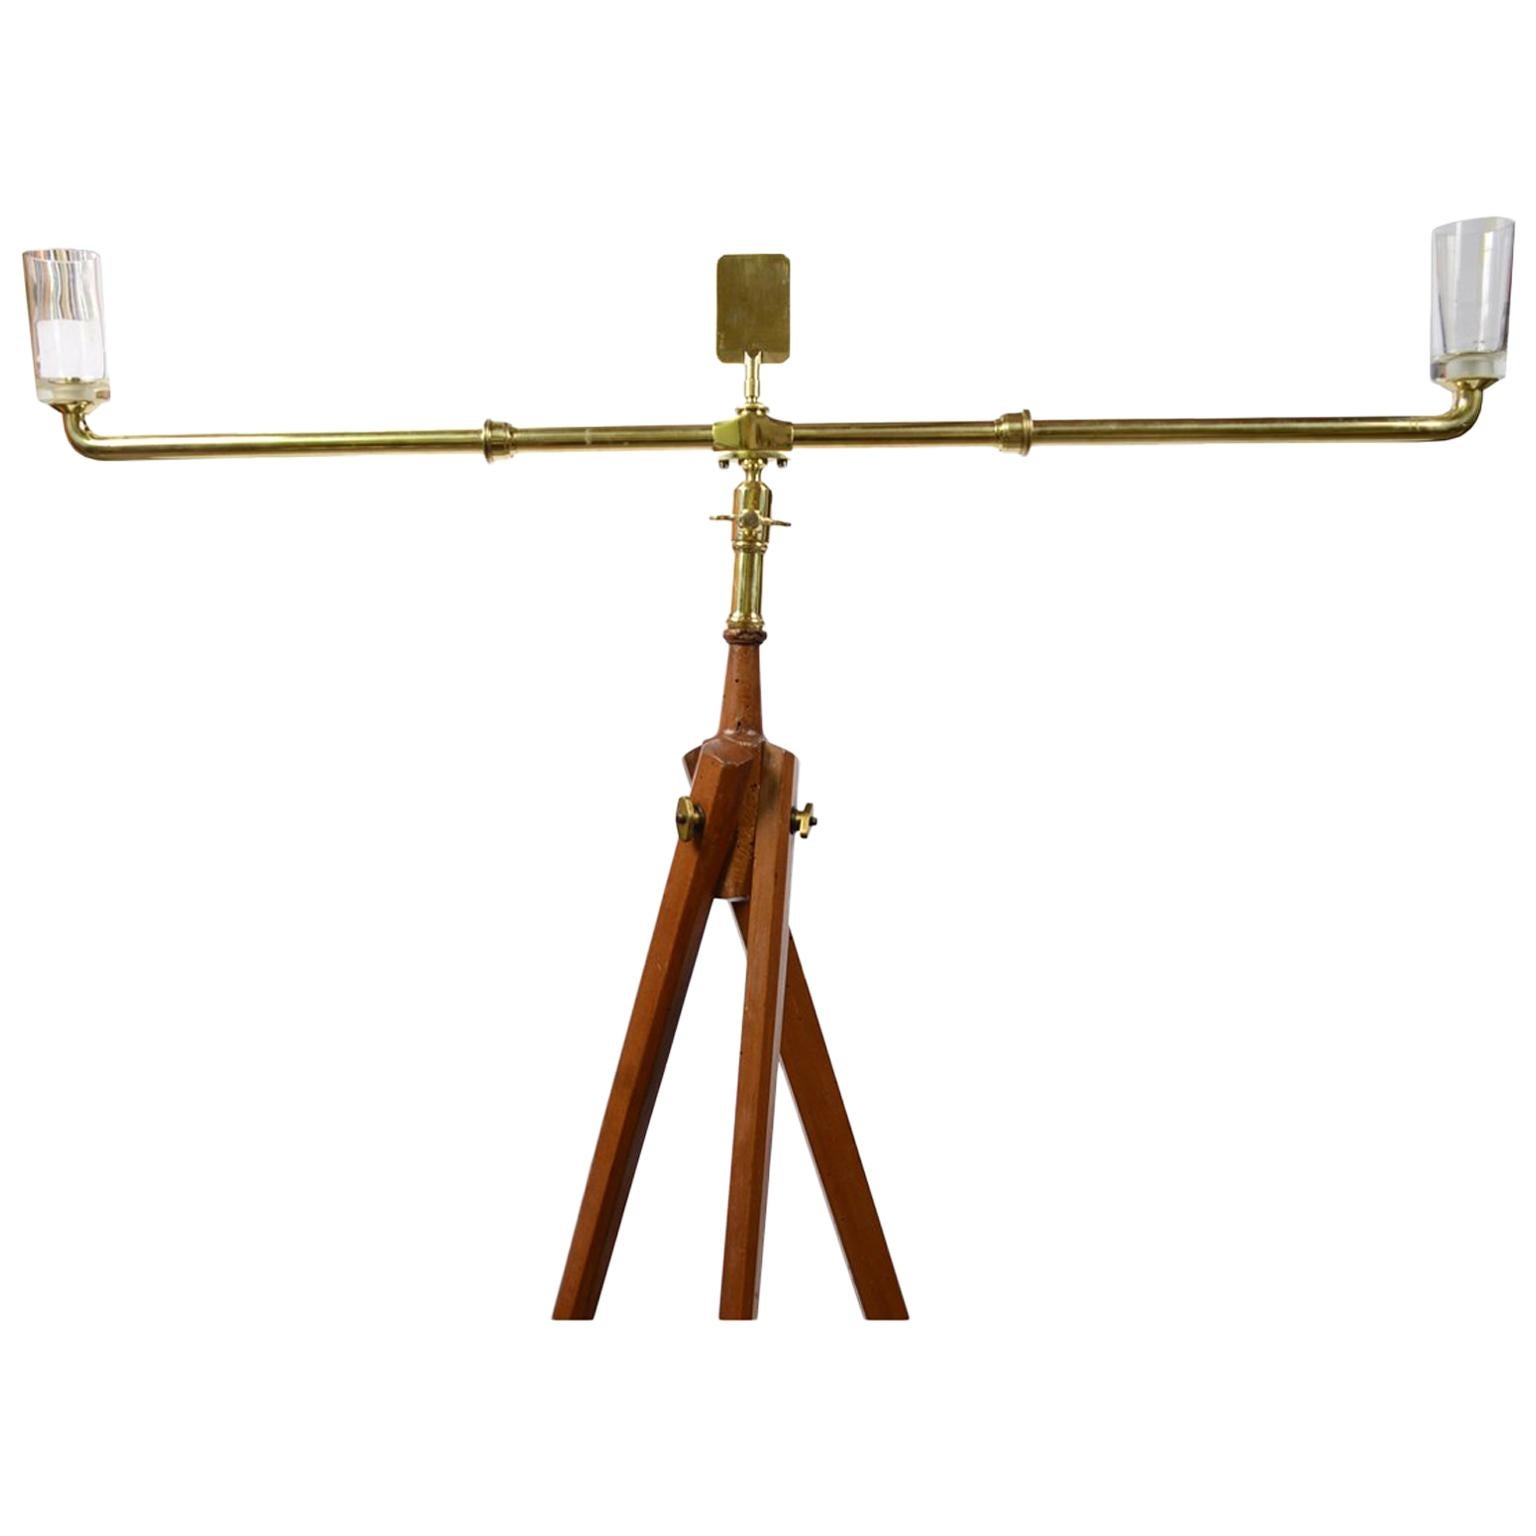 Water Level with Tripod Made in Italy in the Second Half of the 19th Century